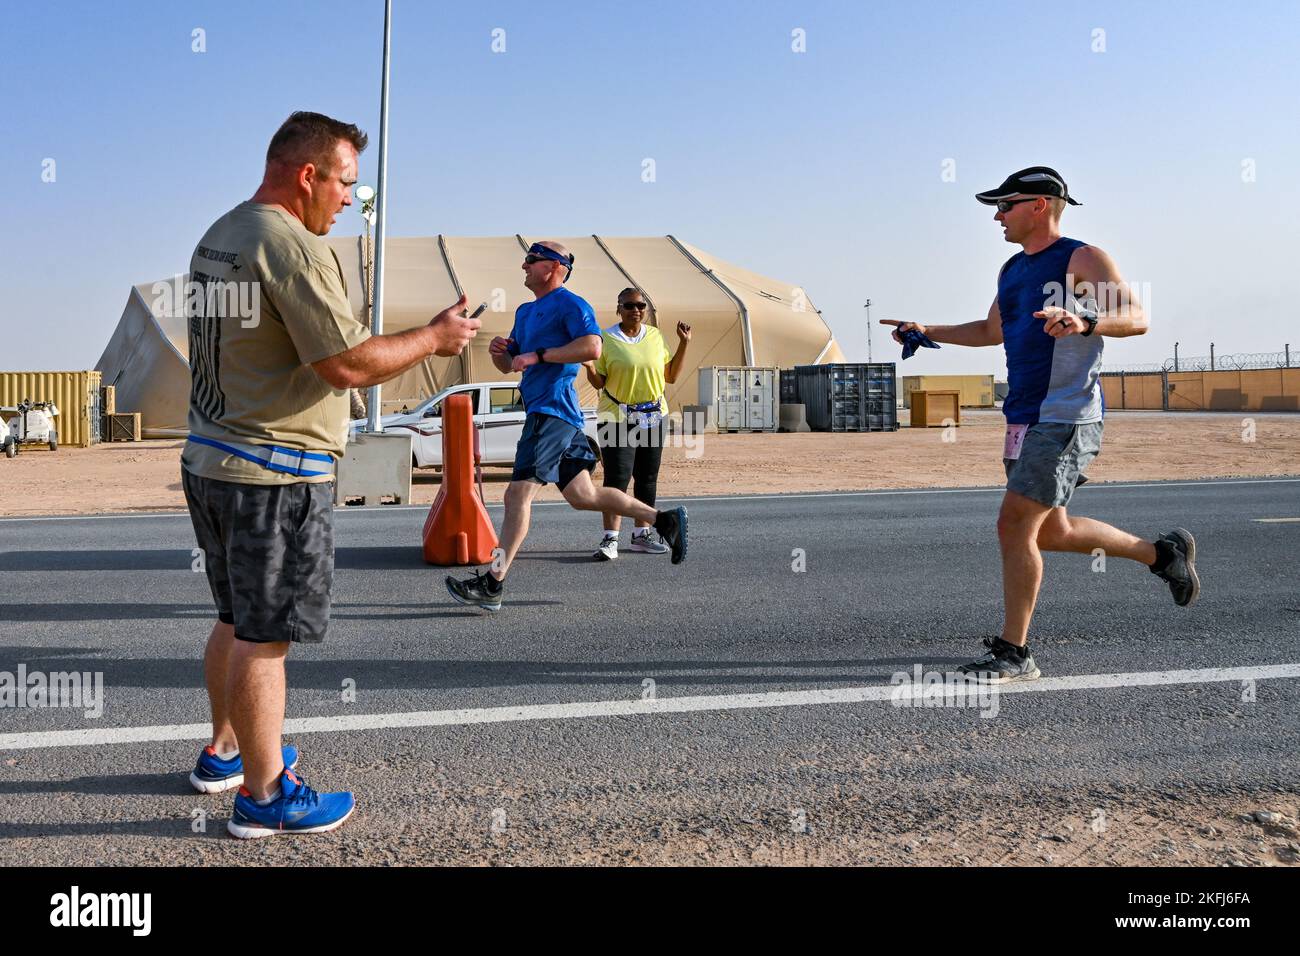 U.S. service members deployed to Prince Sultan Air Base, Kingdom of Saudi Arabia, finish a 5K, 10K or half marathon in celebration of the U.S. Air Force’s 75th Anniversary, Sept.18, 2022. The USAF official separated from the U.S. Army with the signing of the National Security Act of 1947 by former U.S. President Harry Truman. Fly, Fight and Win - Airpower Anytime, Anywhere! Stock Photo